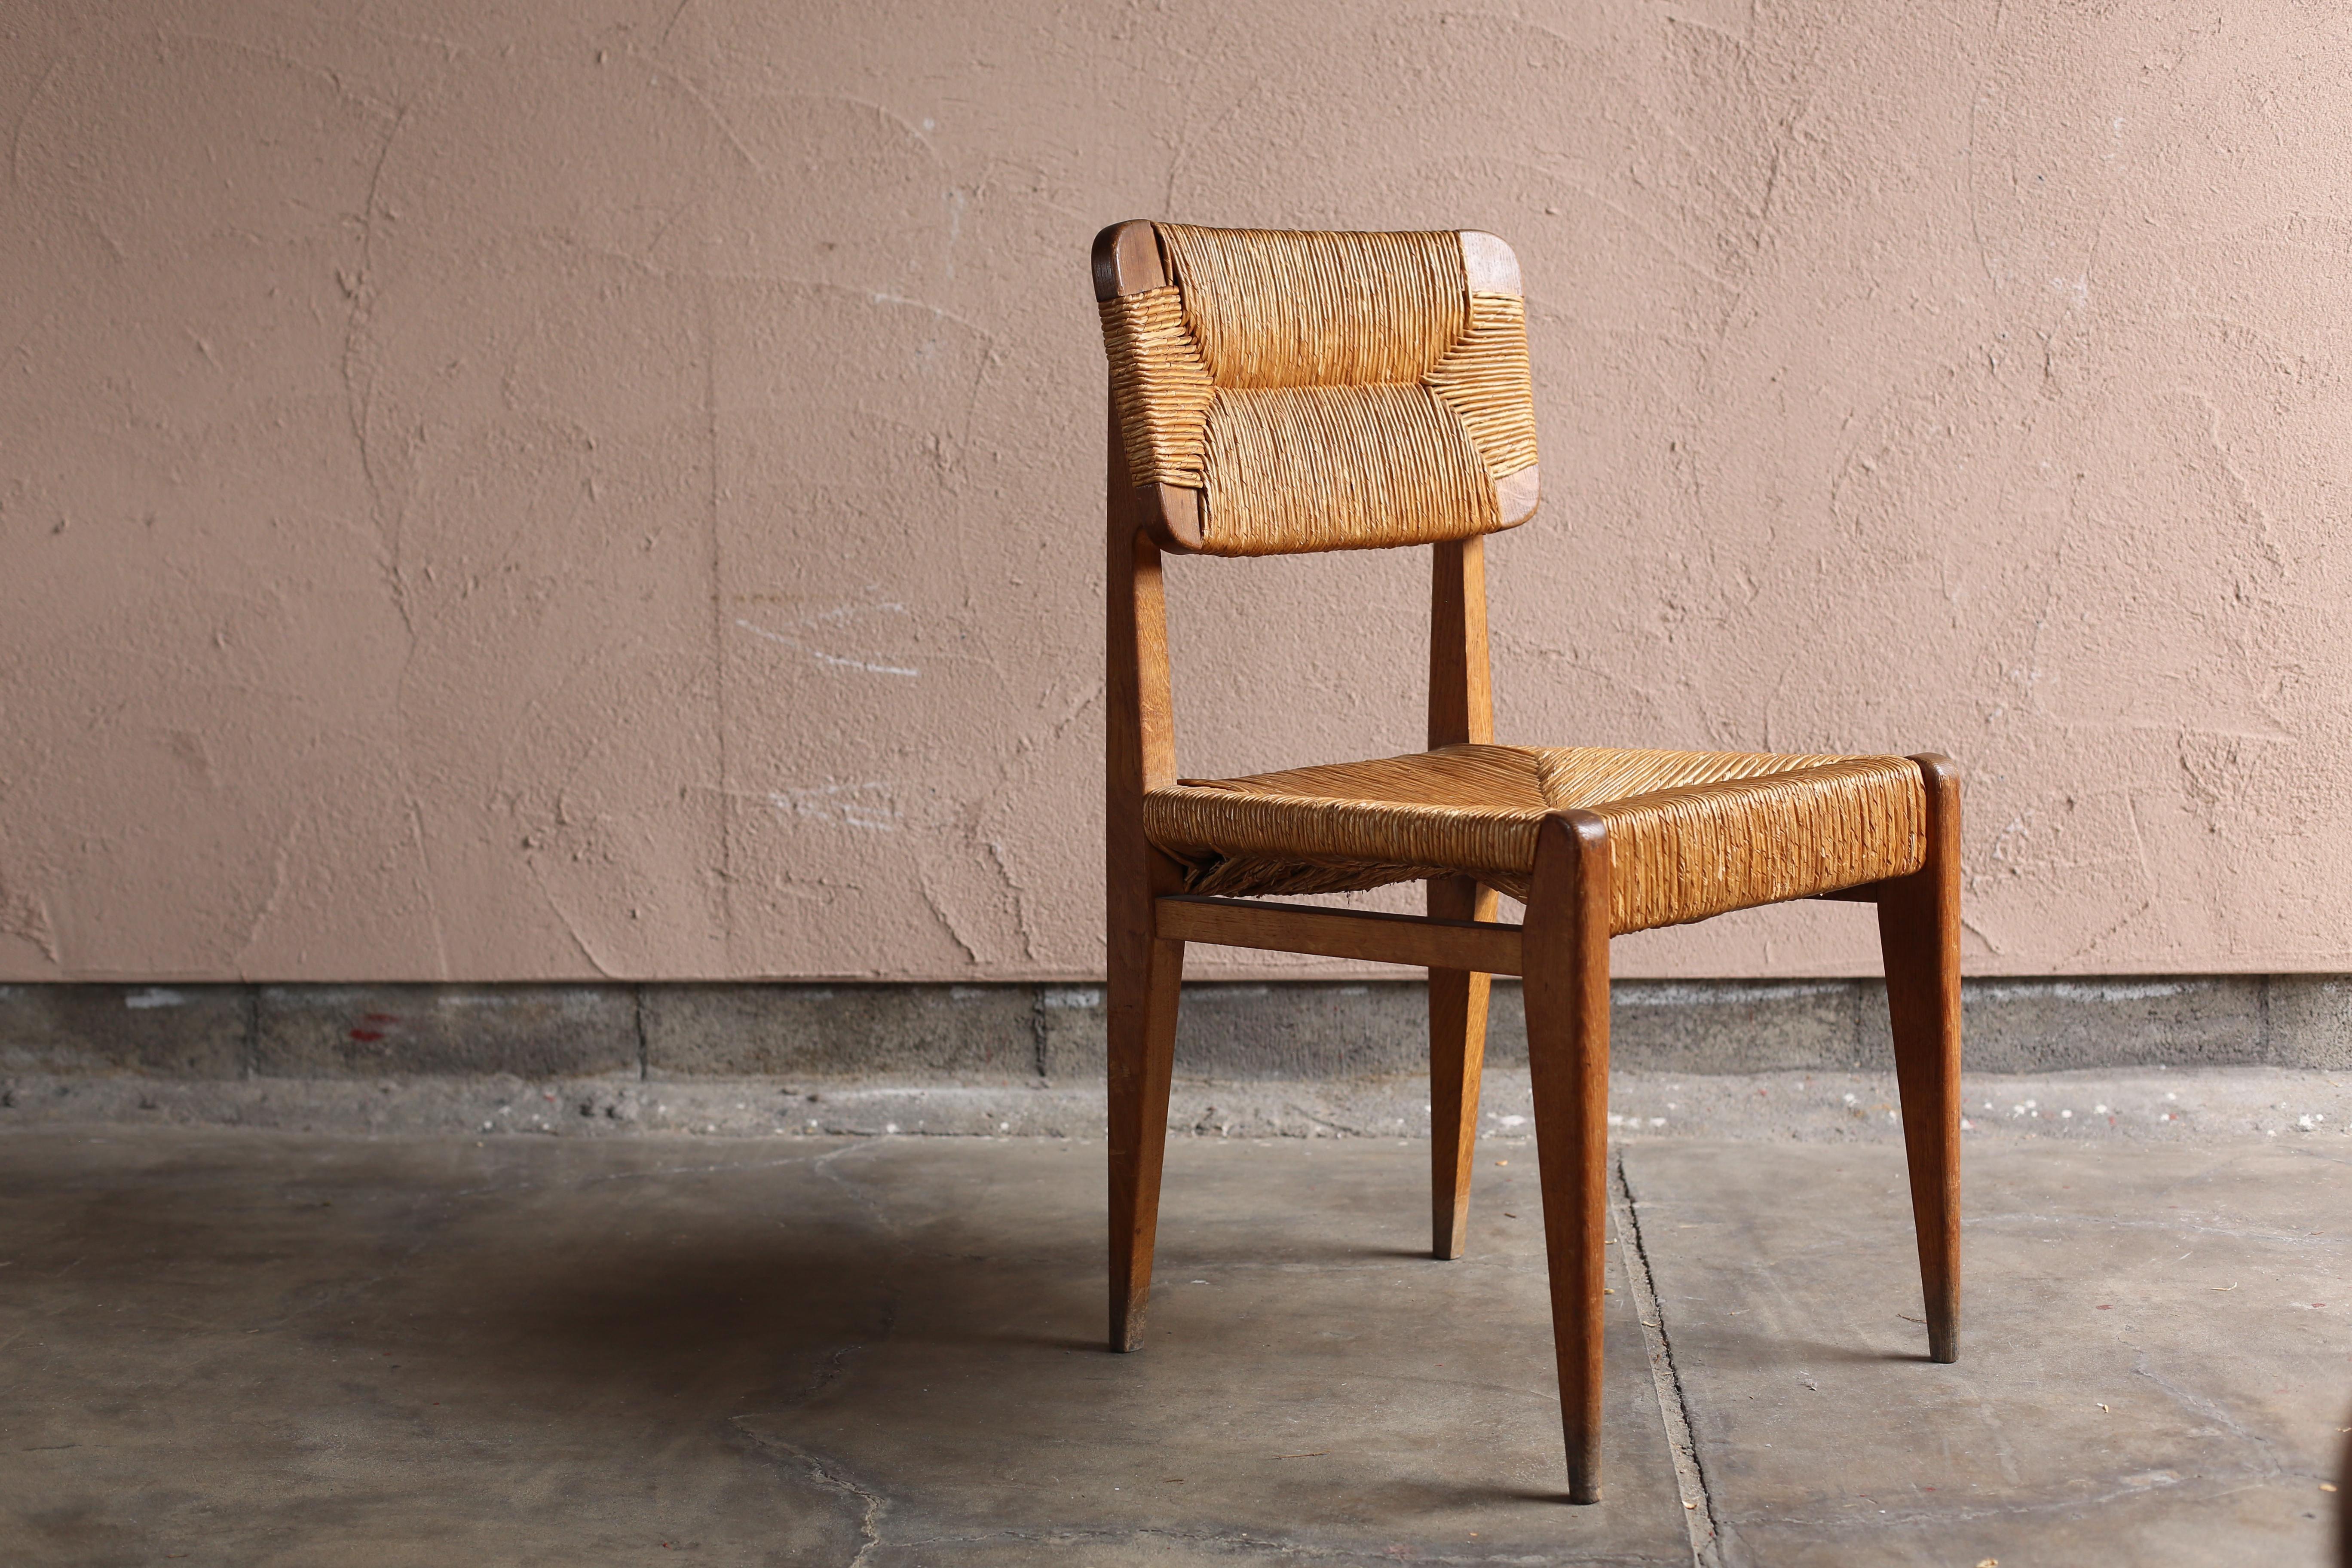 Vintage chair by Marcel Gascoin.
It has his signature backrest design.
The straw on the seat and back has a feeling of tearing due to aging, but it is not decisively cut. It can be used as is.